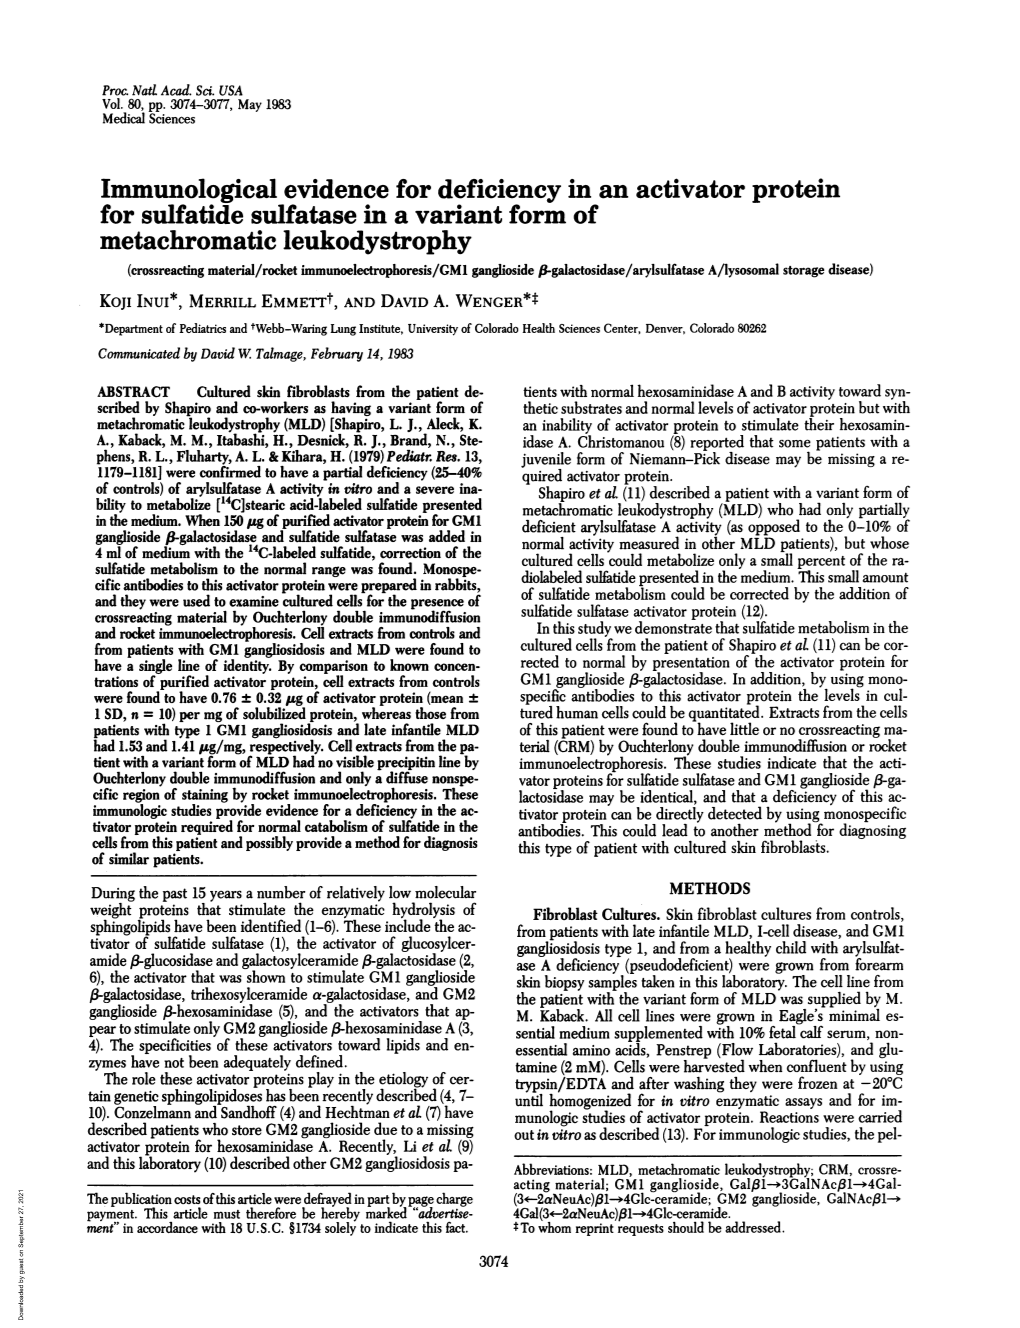 Immunological Evidence for Deficiency in an Activator Protein for Sulfatide